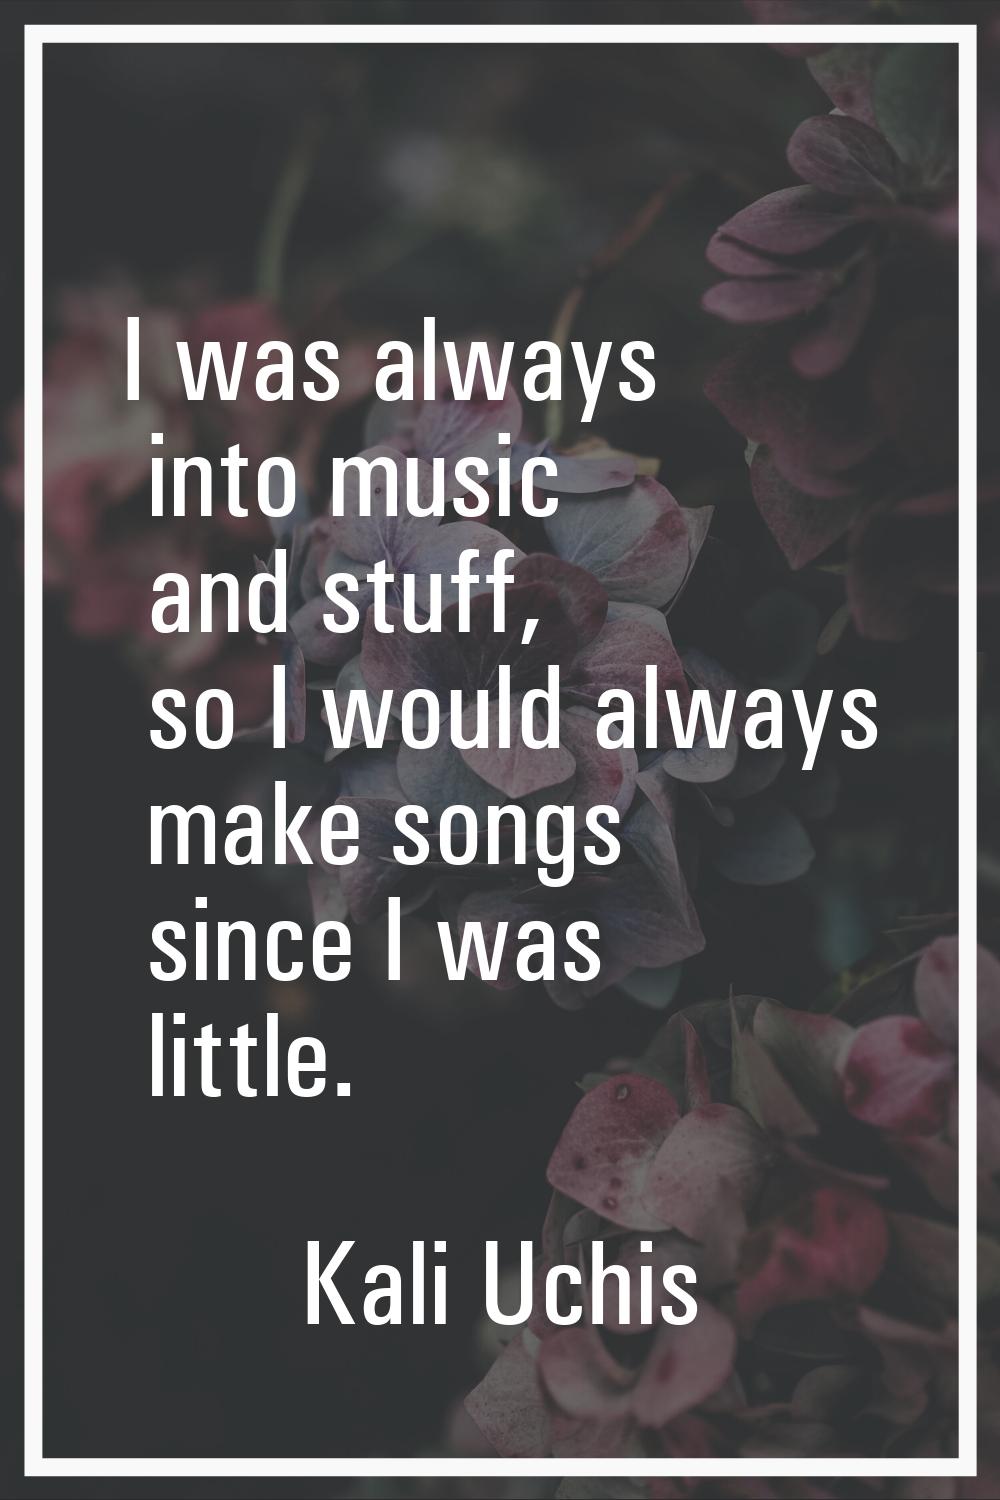 I was always into music and stuff, so I would always make songs since I was little.